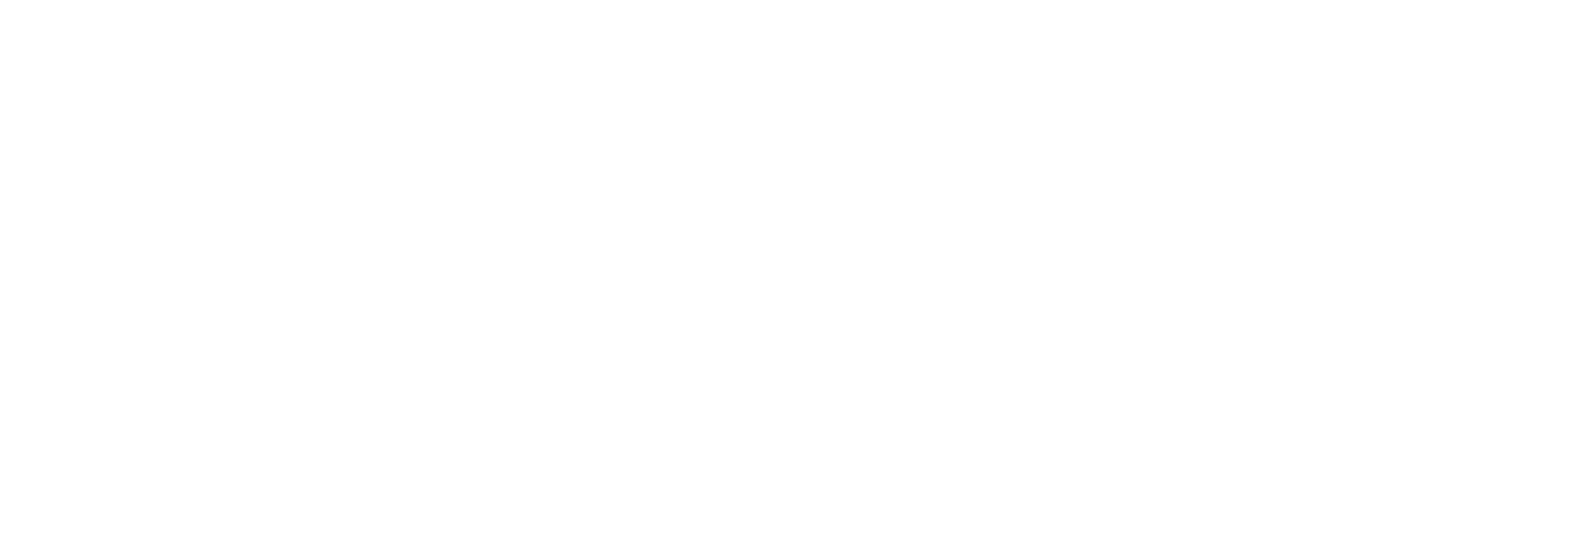 Branding and Messaging Service | pittsburgh-tech-council-white-logo